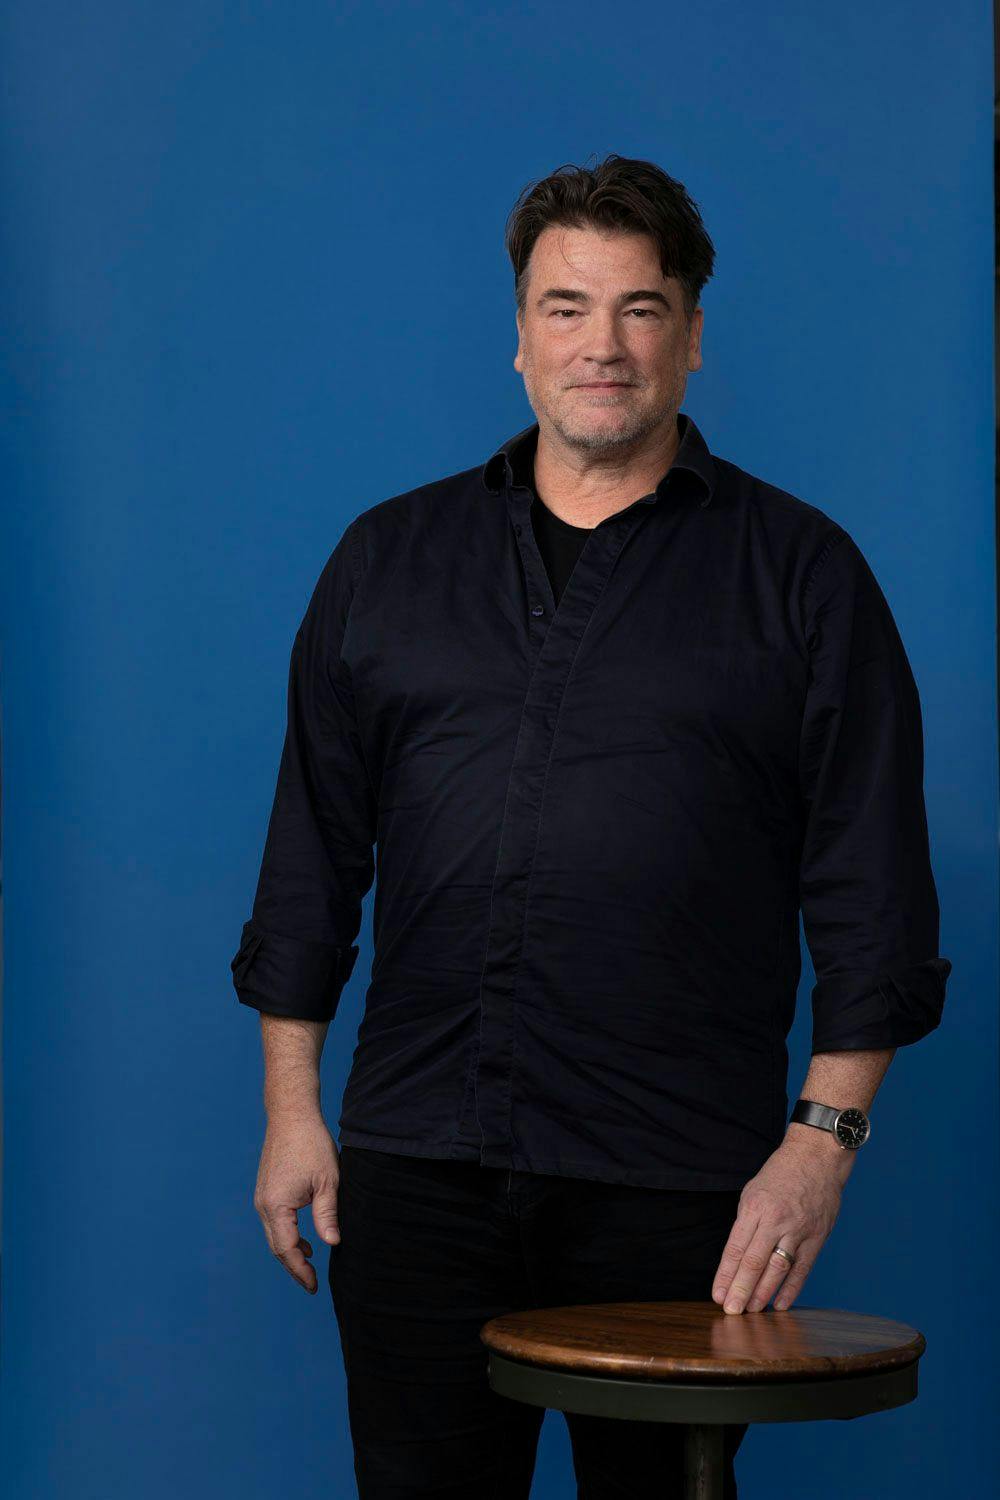 Mark Kingsley standing behind a stool against a blue backdrop.